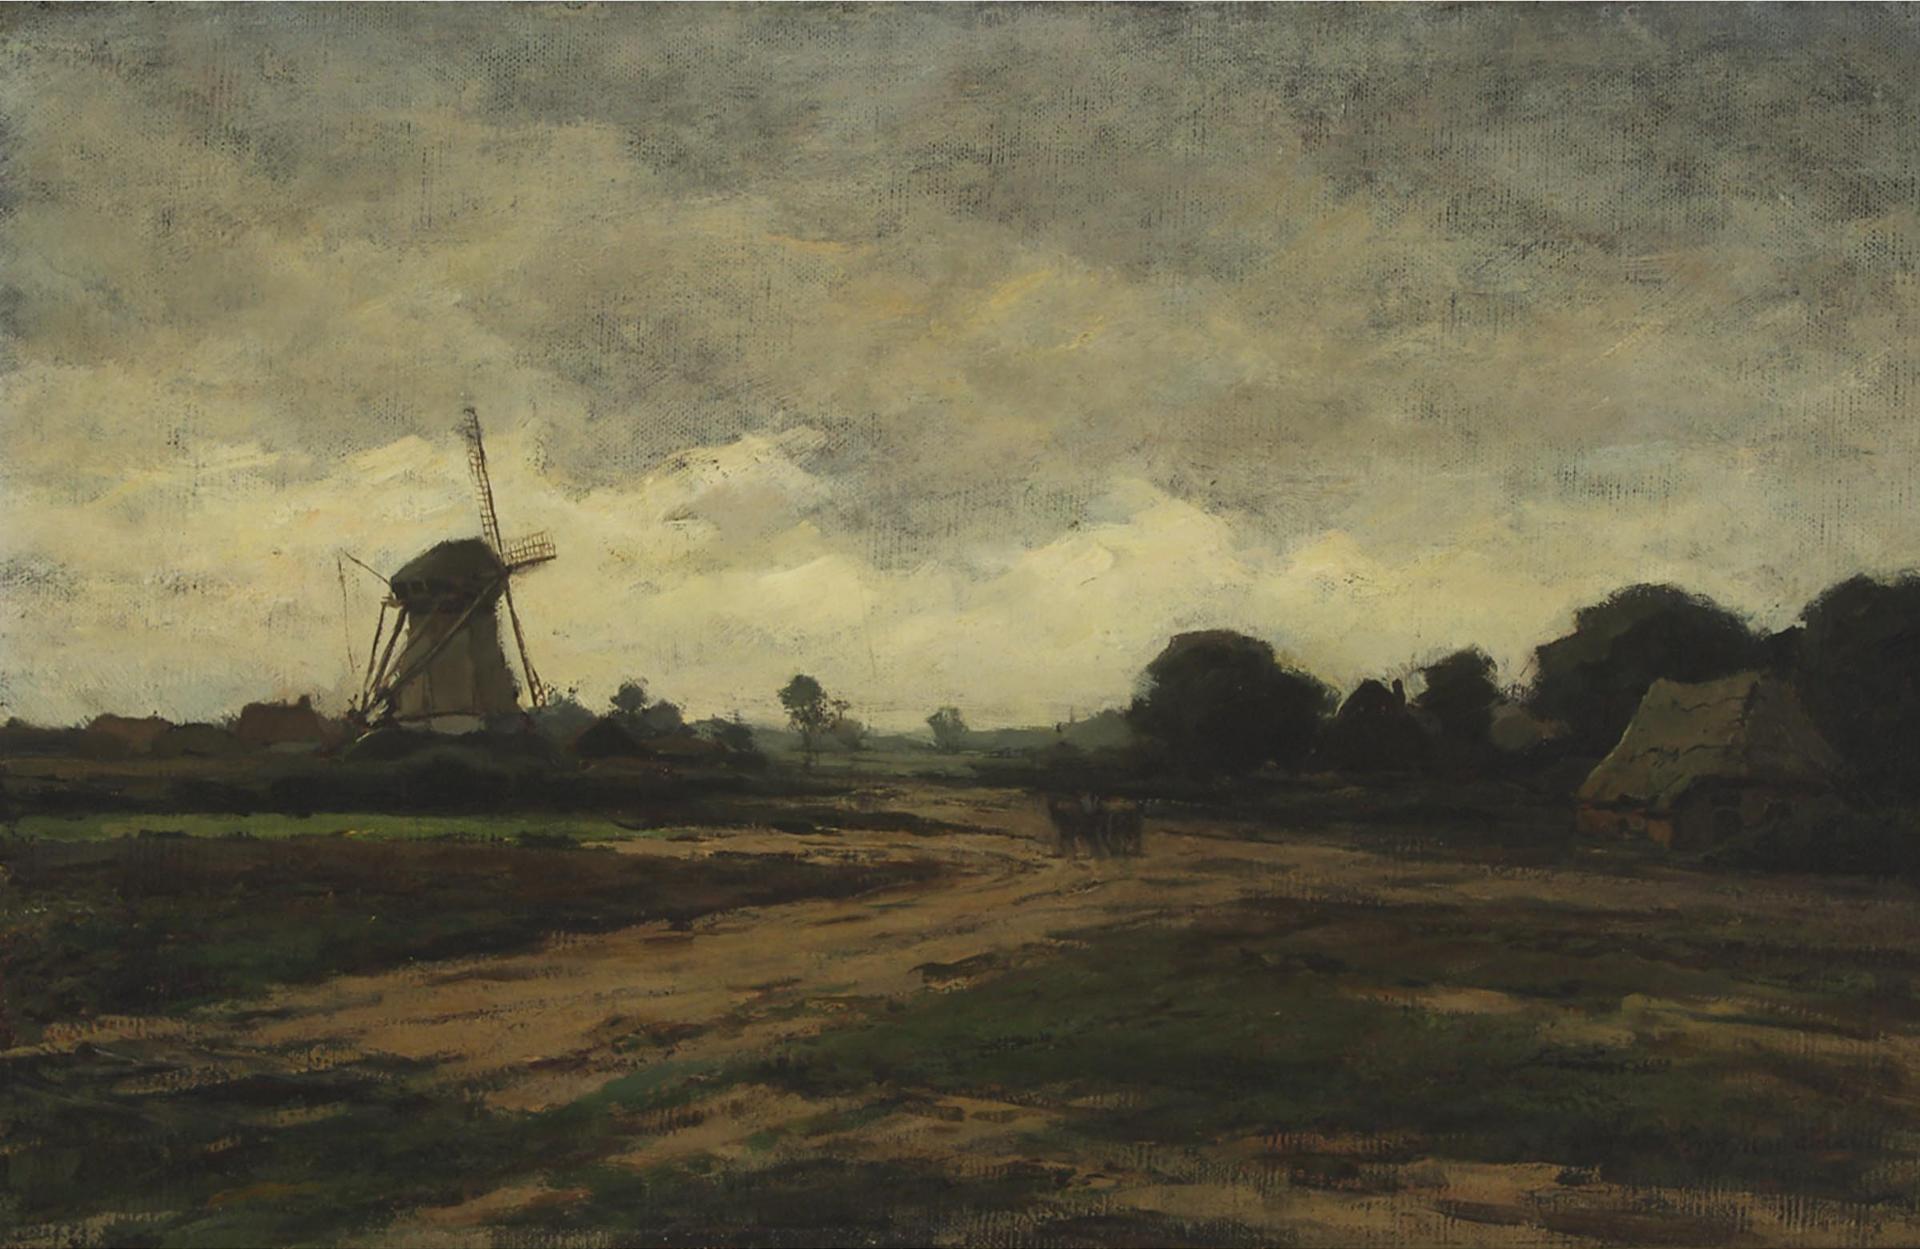 Frits Mondriaan (1853-1932) - Windmill Landscape With Horse Drawn Wagon On Route